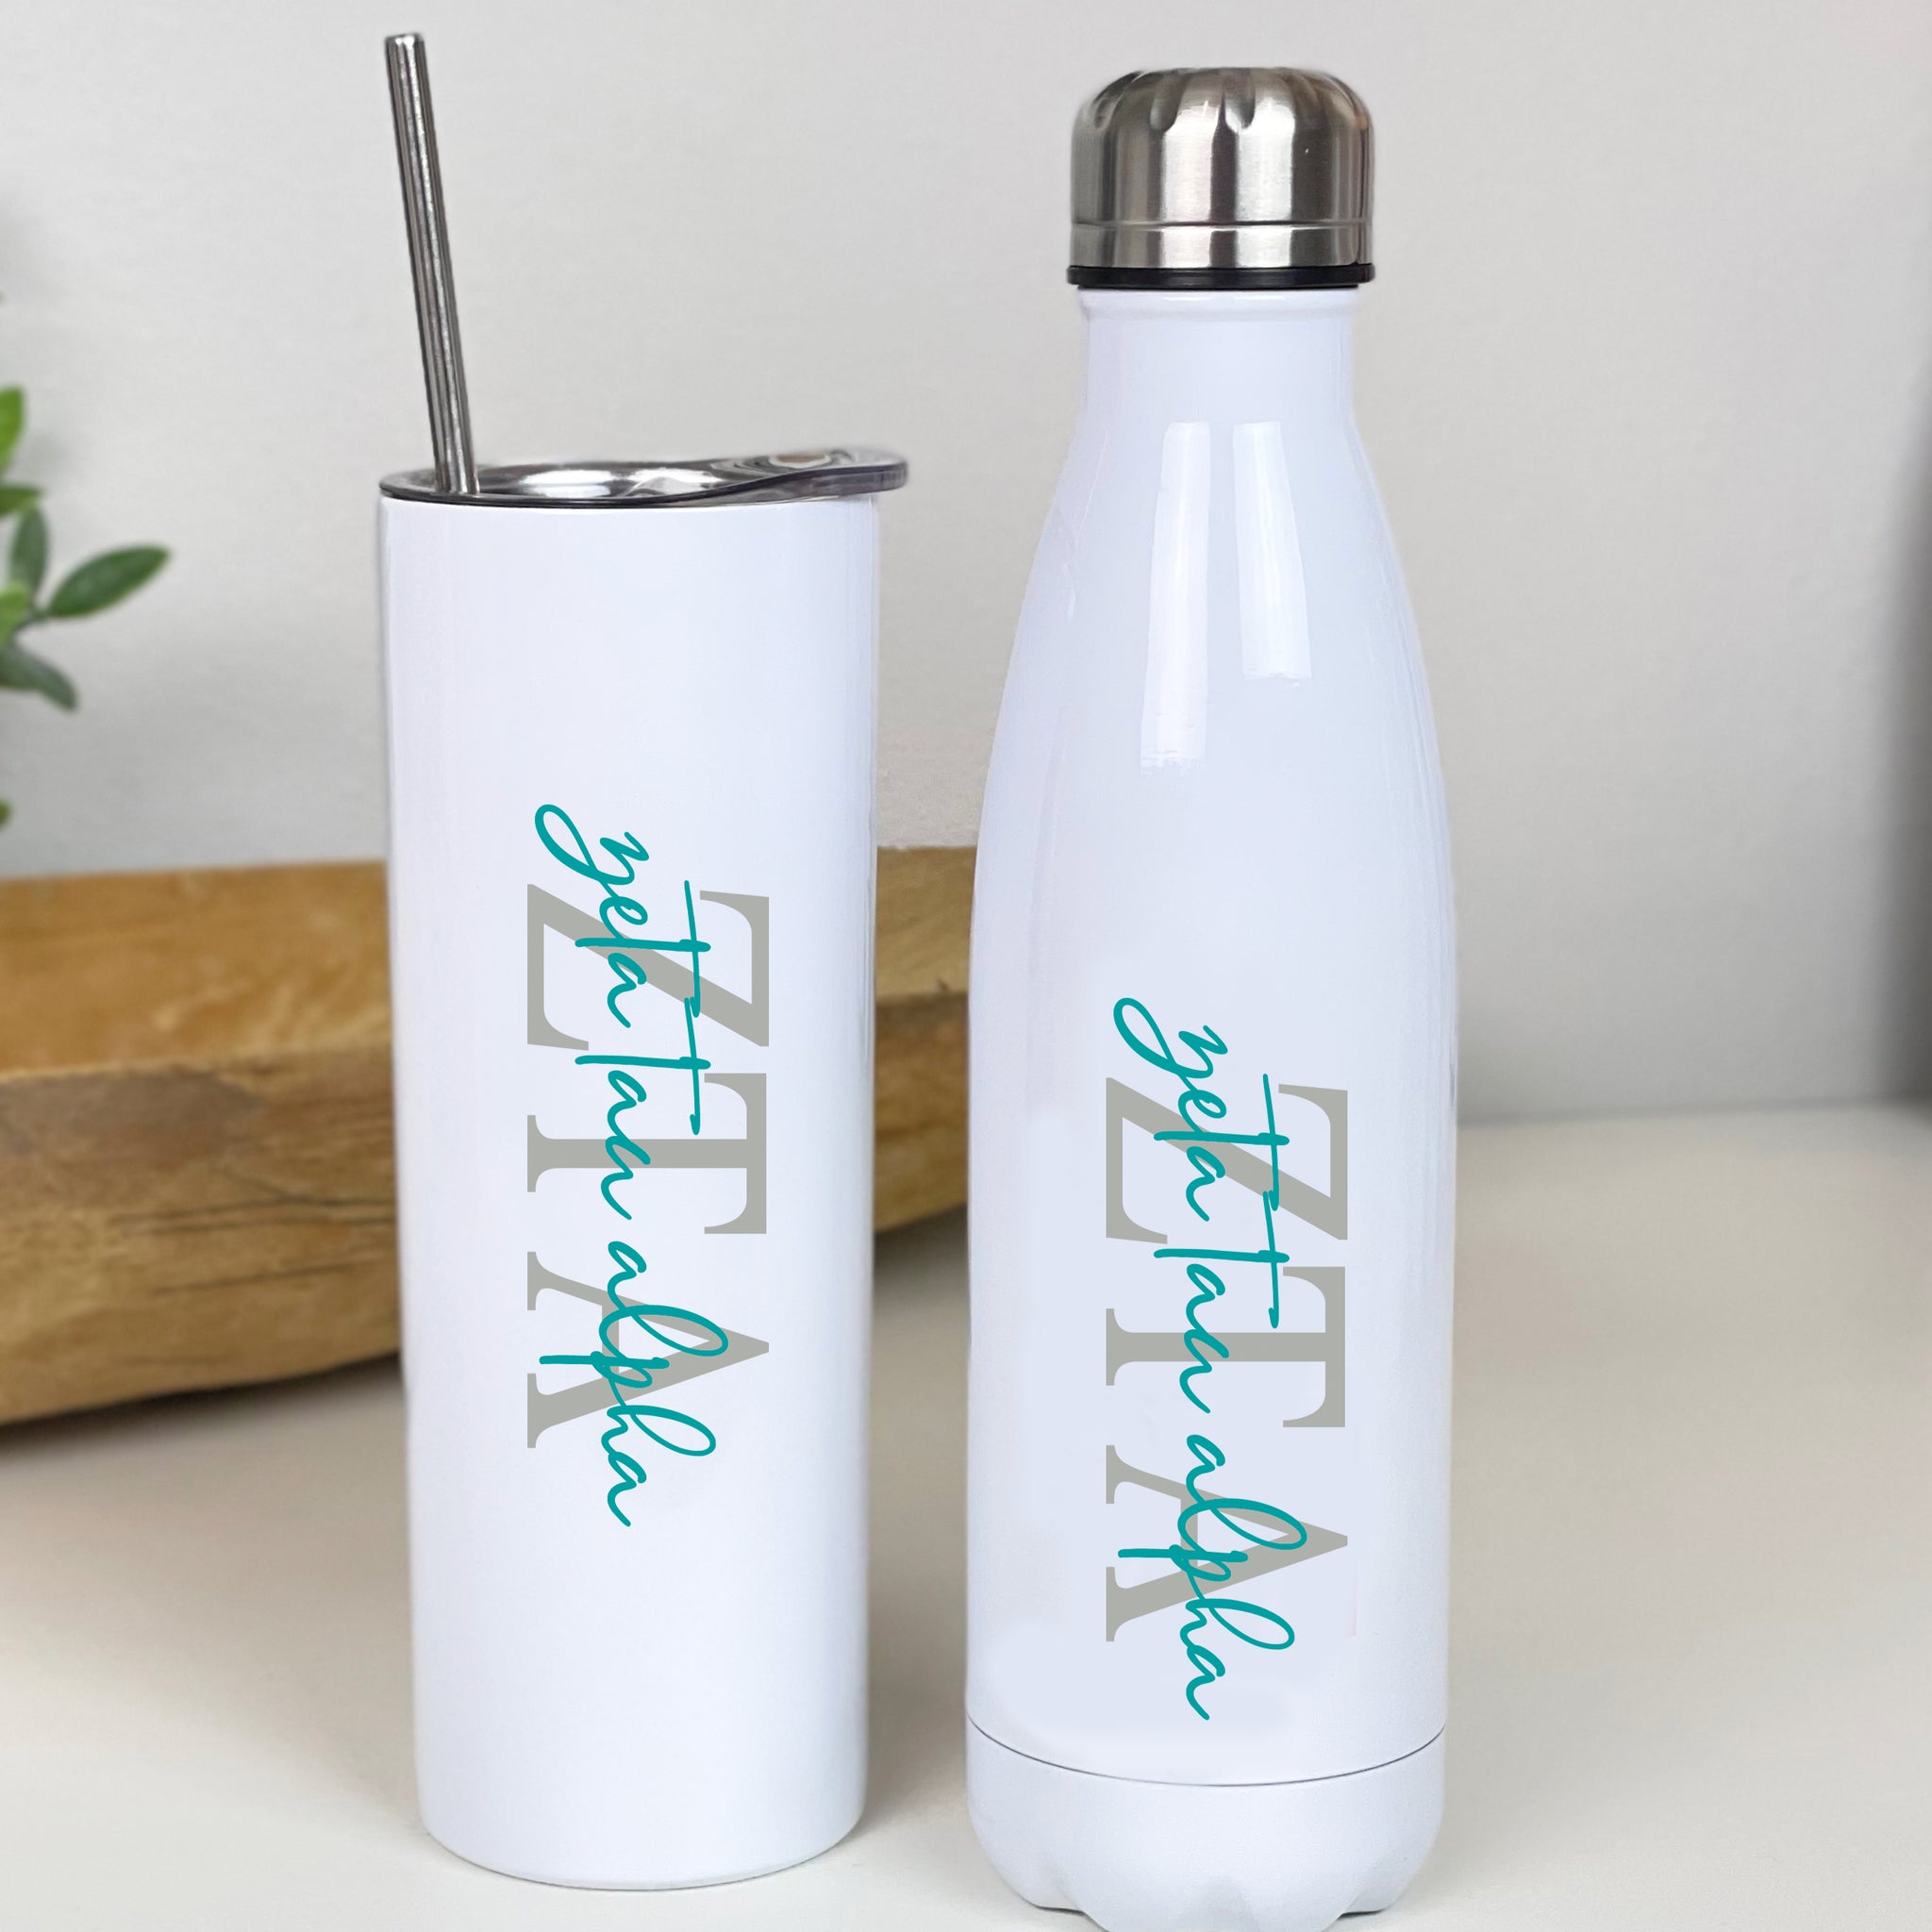 Zeta Tau Alpha Water Bottle or Skinny Tumbler - Happy Thoughts Gifts